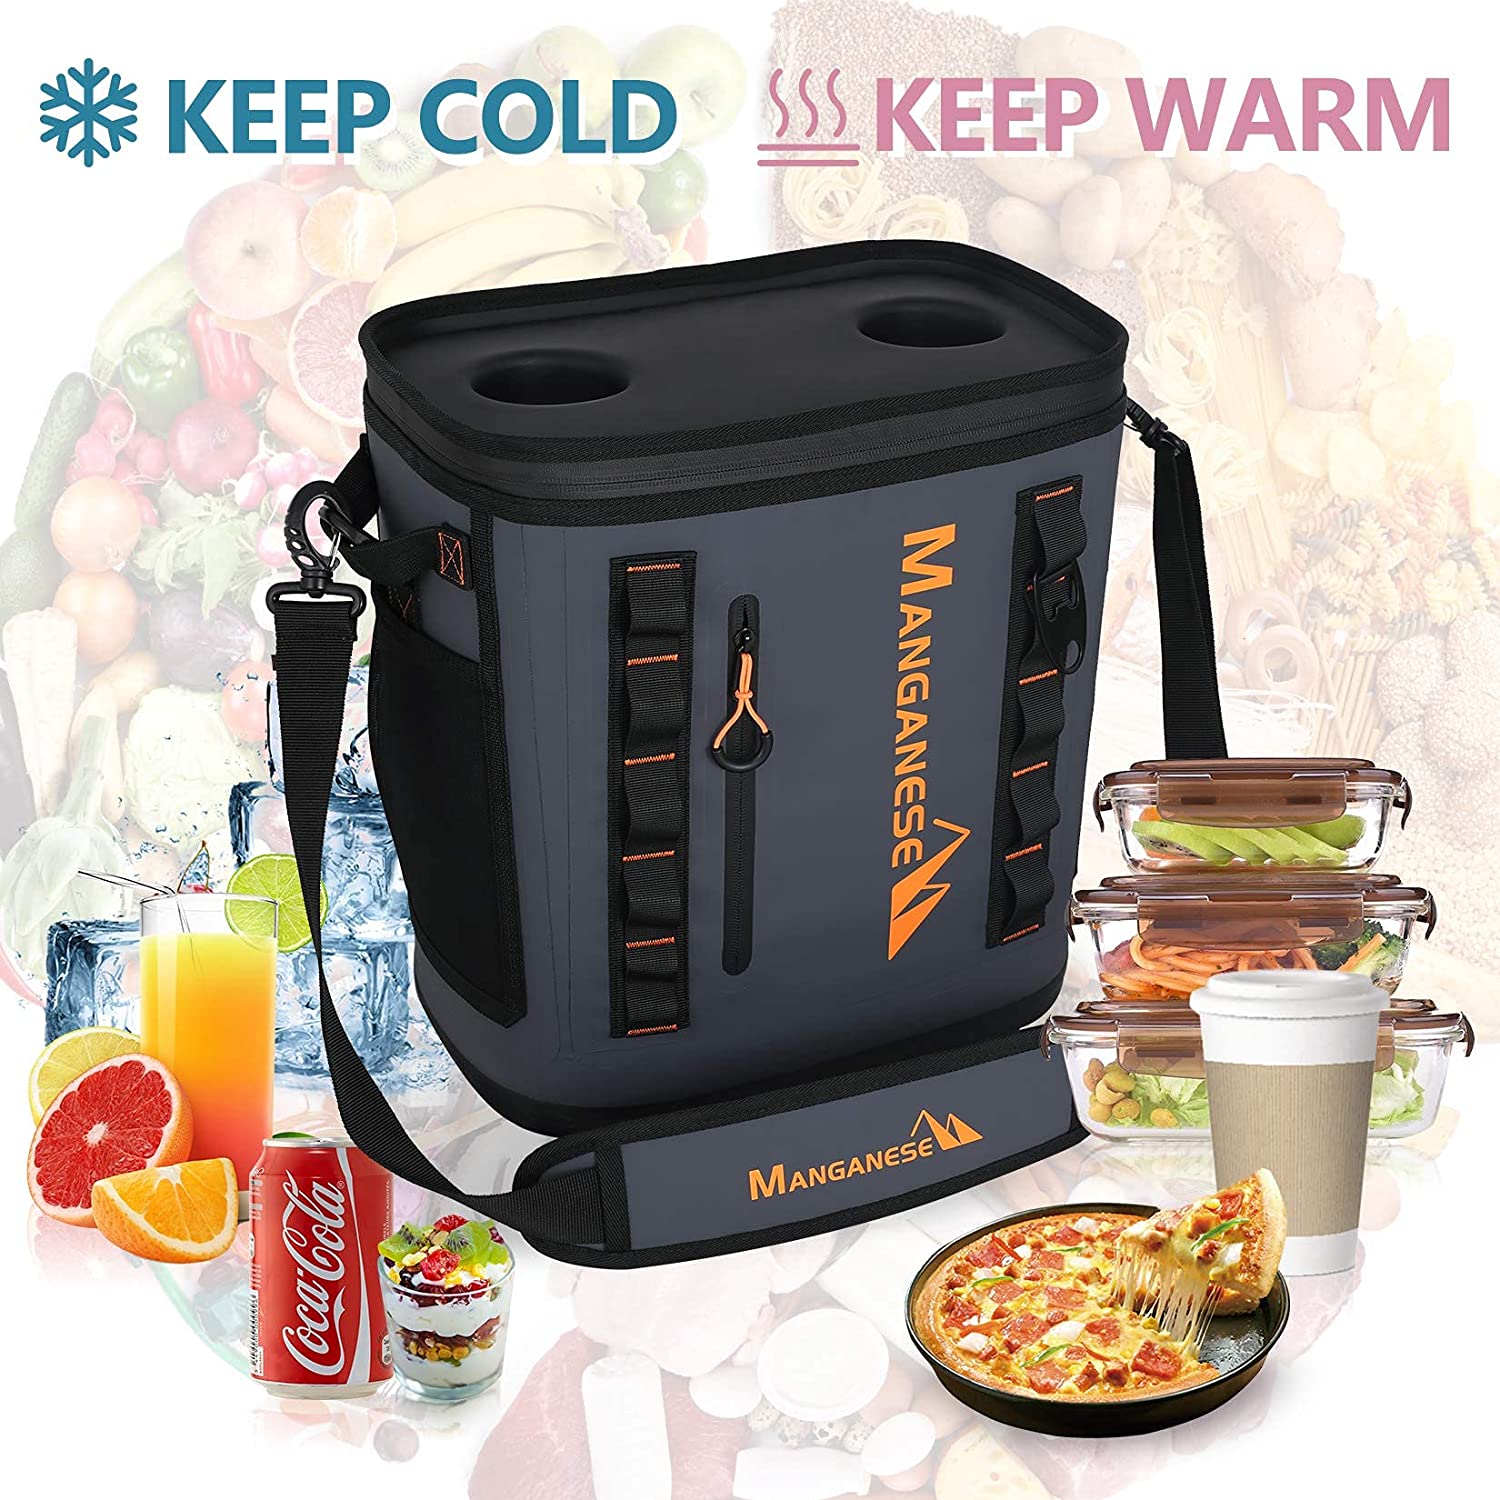 10 BEST BACKPACK COOLER 2022 REVIEW All In One Cooling Gear Lab: Any Refrigerators Air Conditioners Freezers Ice Makers Coolers Fans Reviewed And Compared.